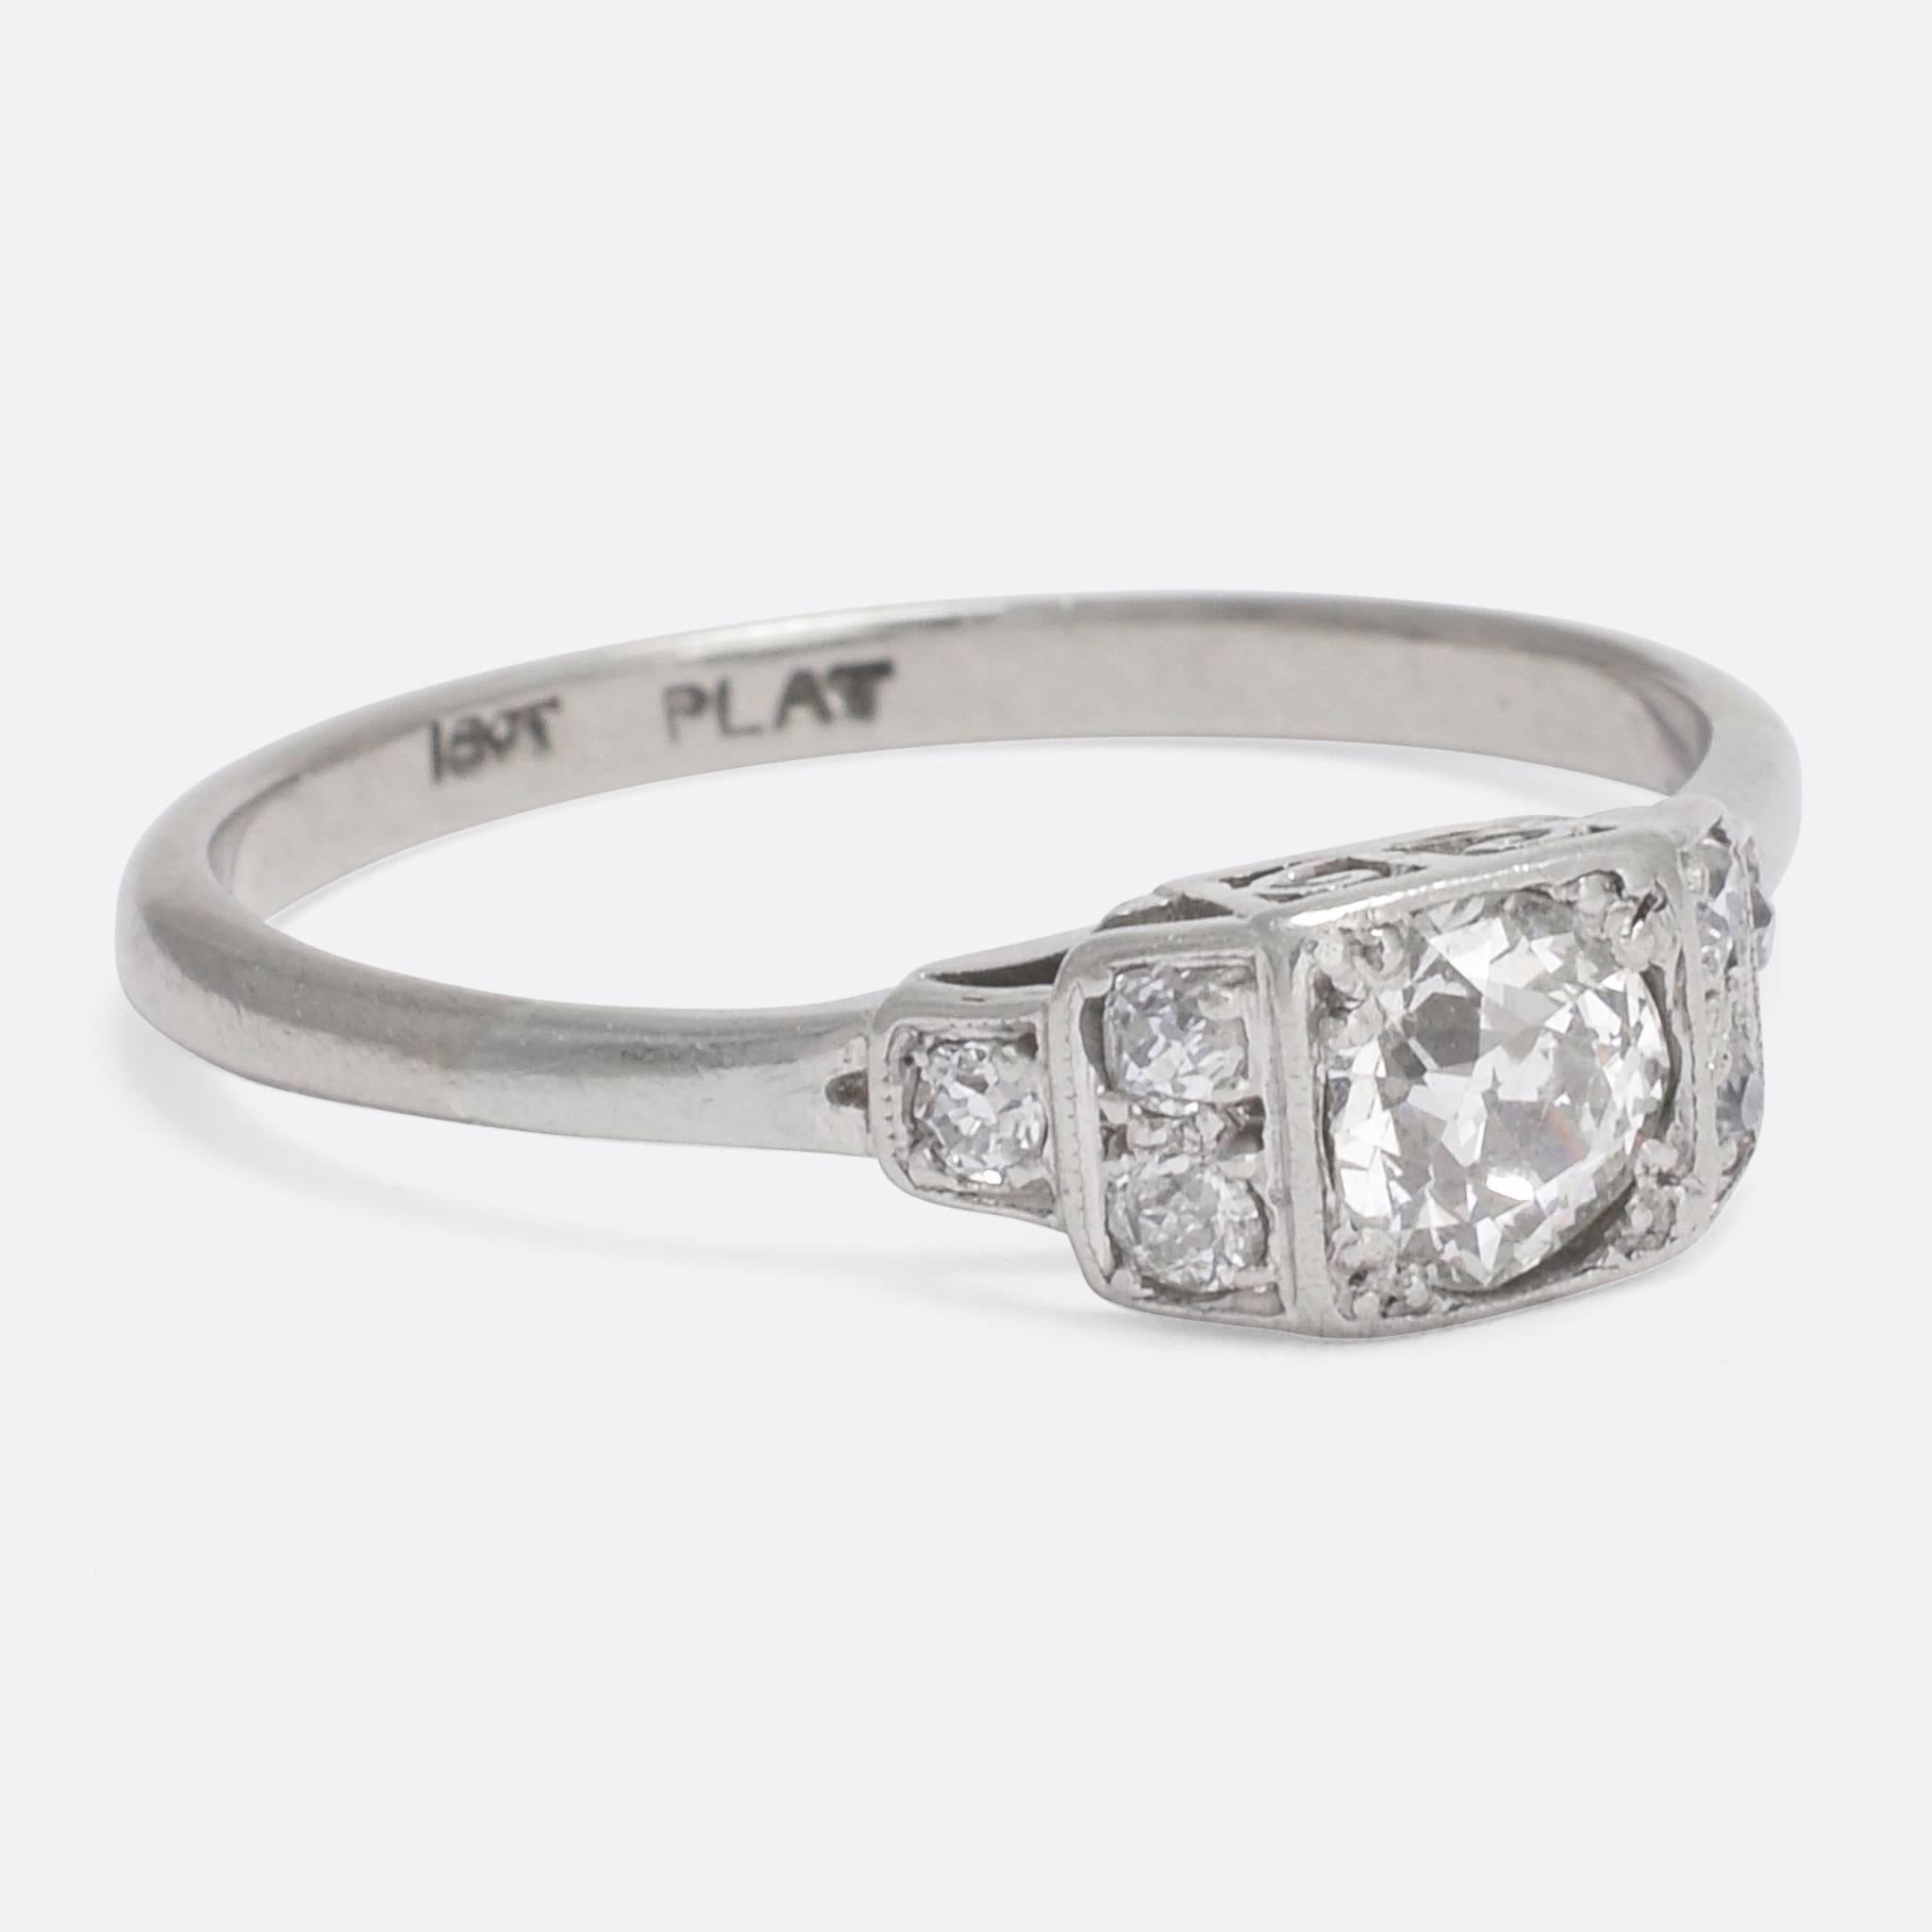 This superb Art Deco solitaire ring is set with a bright half carat old European cut diamond, with stepped shoulders home to six further old cut accents. Pretty scrolled motifs to the pierced gallery combine to form a heart, and also allow light in